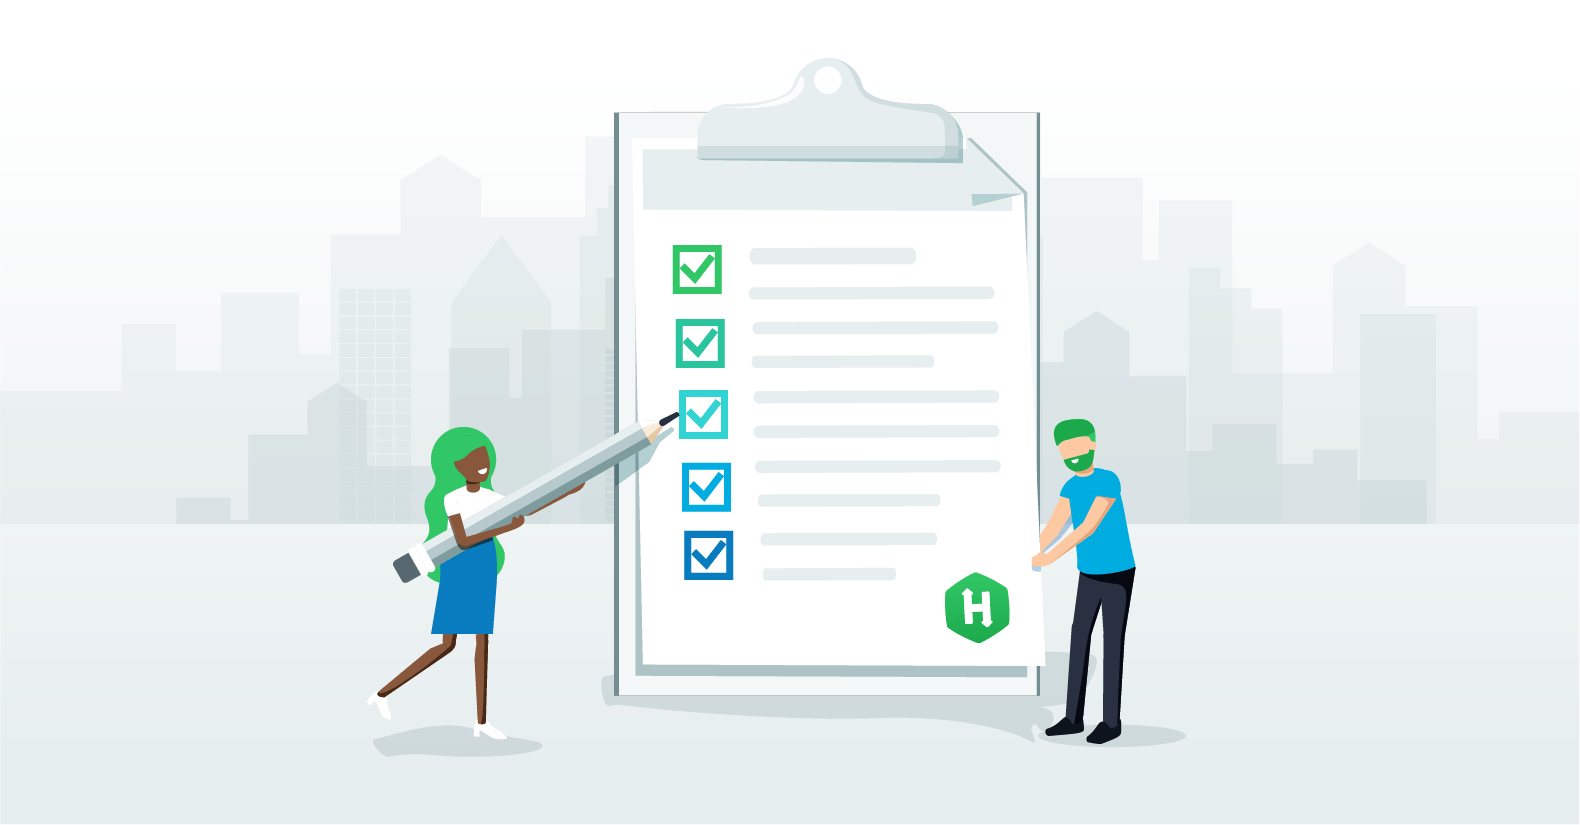 Illustration of a giant checklist containing Hackerrank's logo, with one person on the left holding up a pencil to it